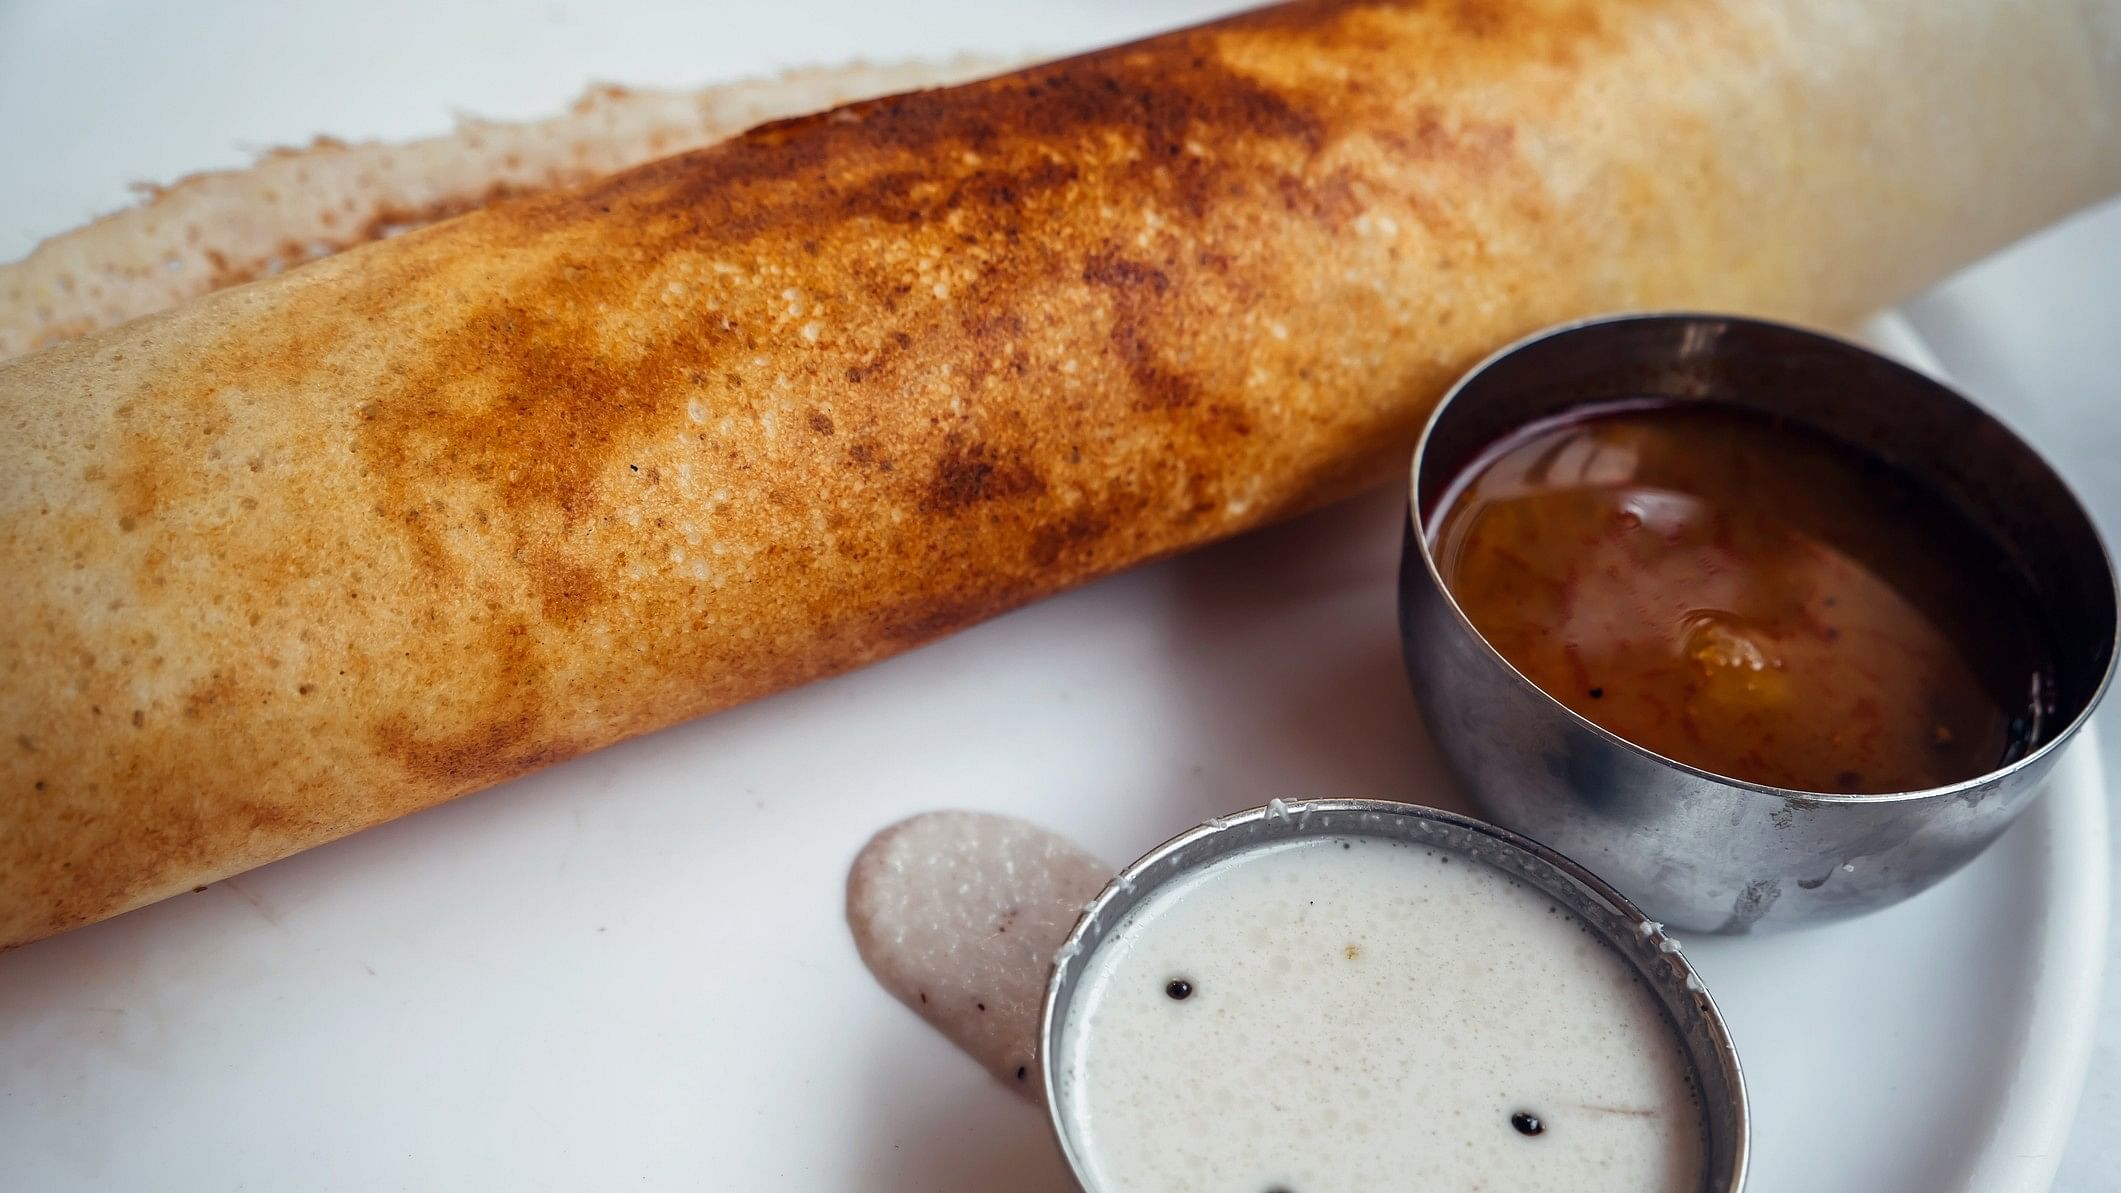 <div class="paragraphs"><p>Free dosas, laddu, coffee and other food items are being offered at discounted rates to those who vote in Bengaluru.&nbsp;</p></div>